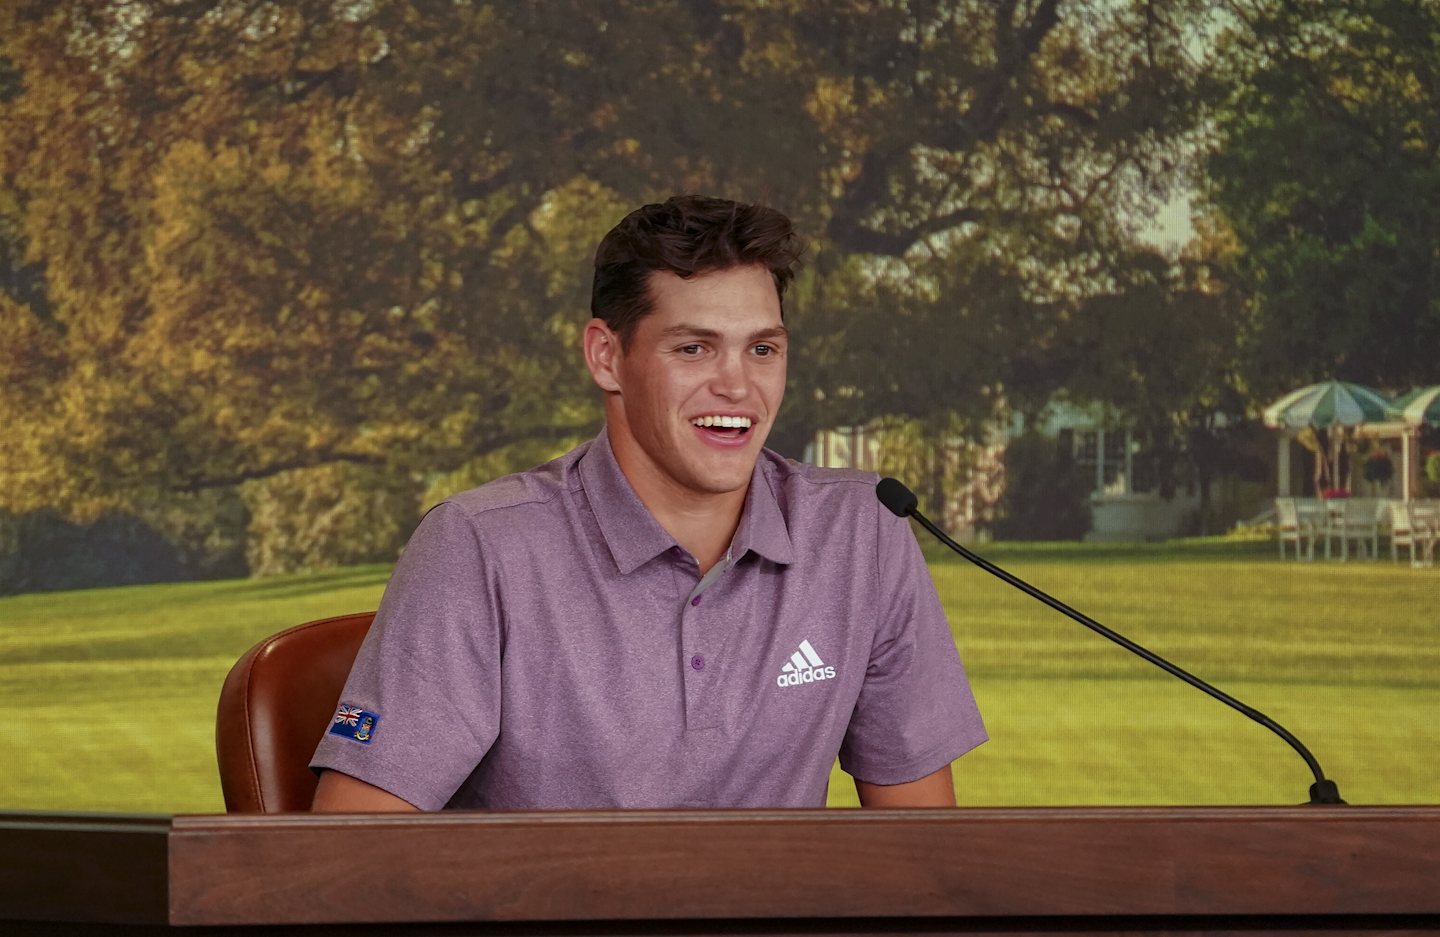 Aaron Jarvis of Cayman Islands, winner of the 2021 Latin America Amateur Championship, speaks to the media at a press conference in the Interview Room.